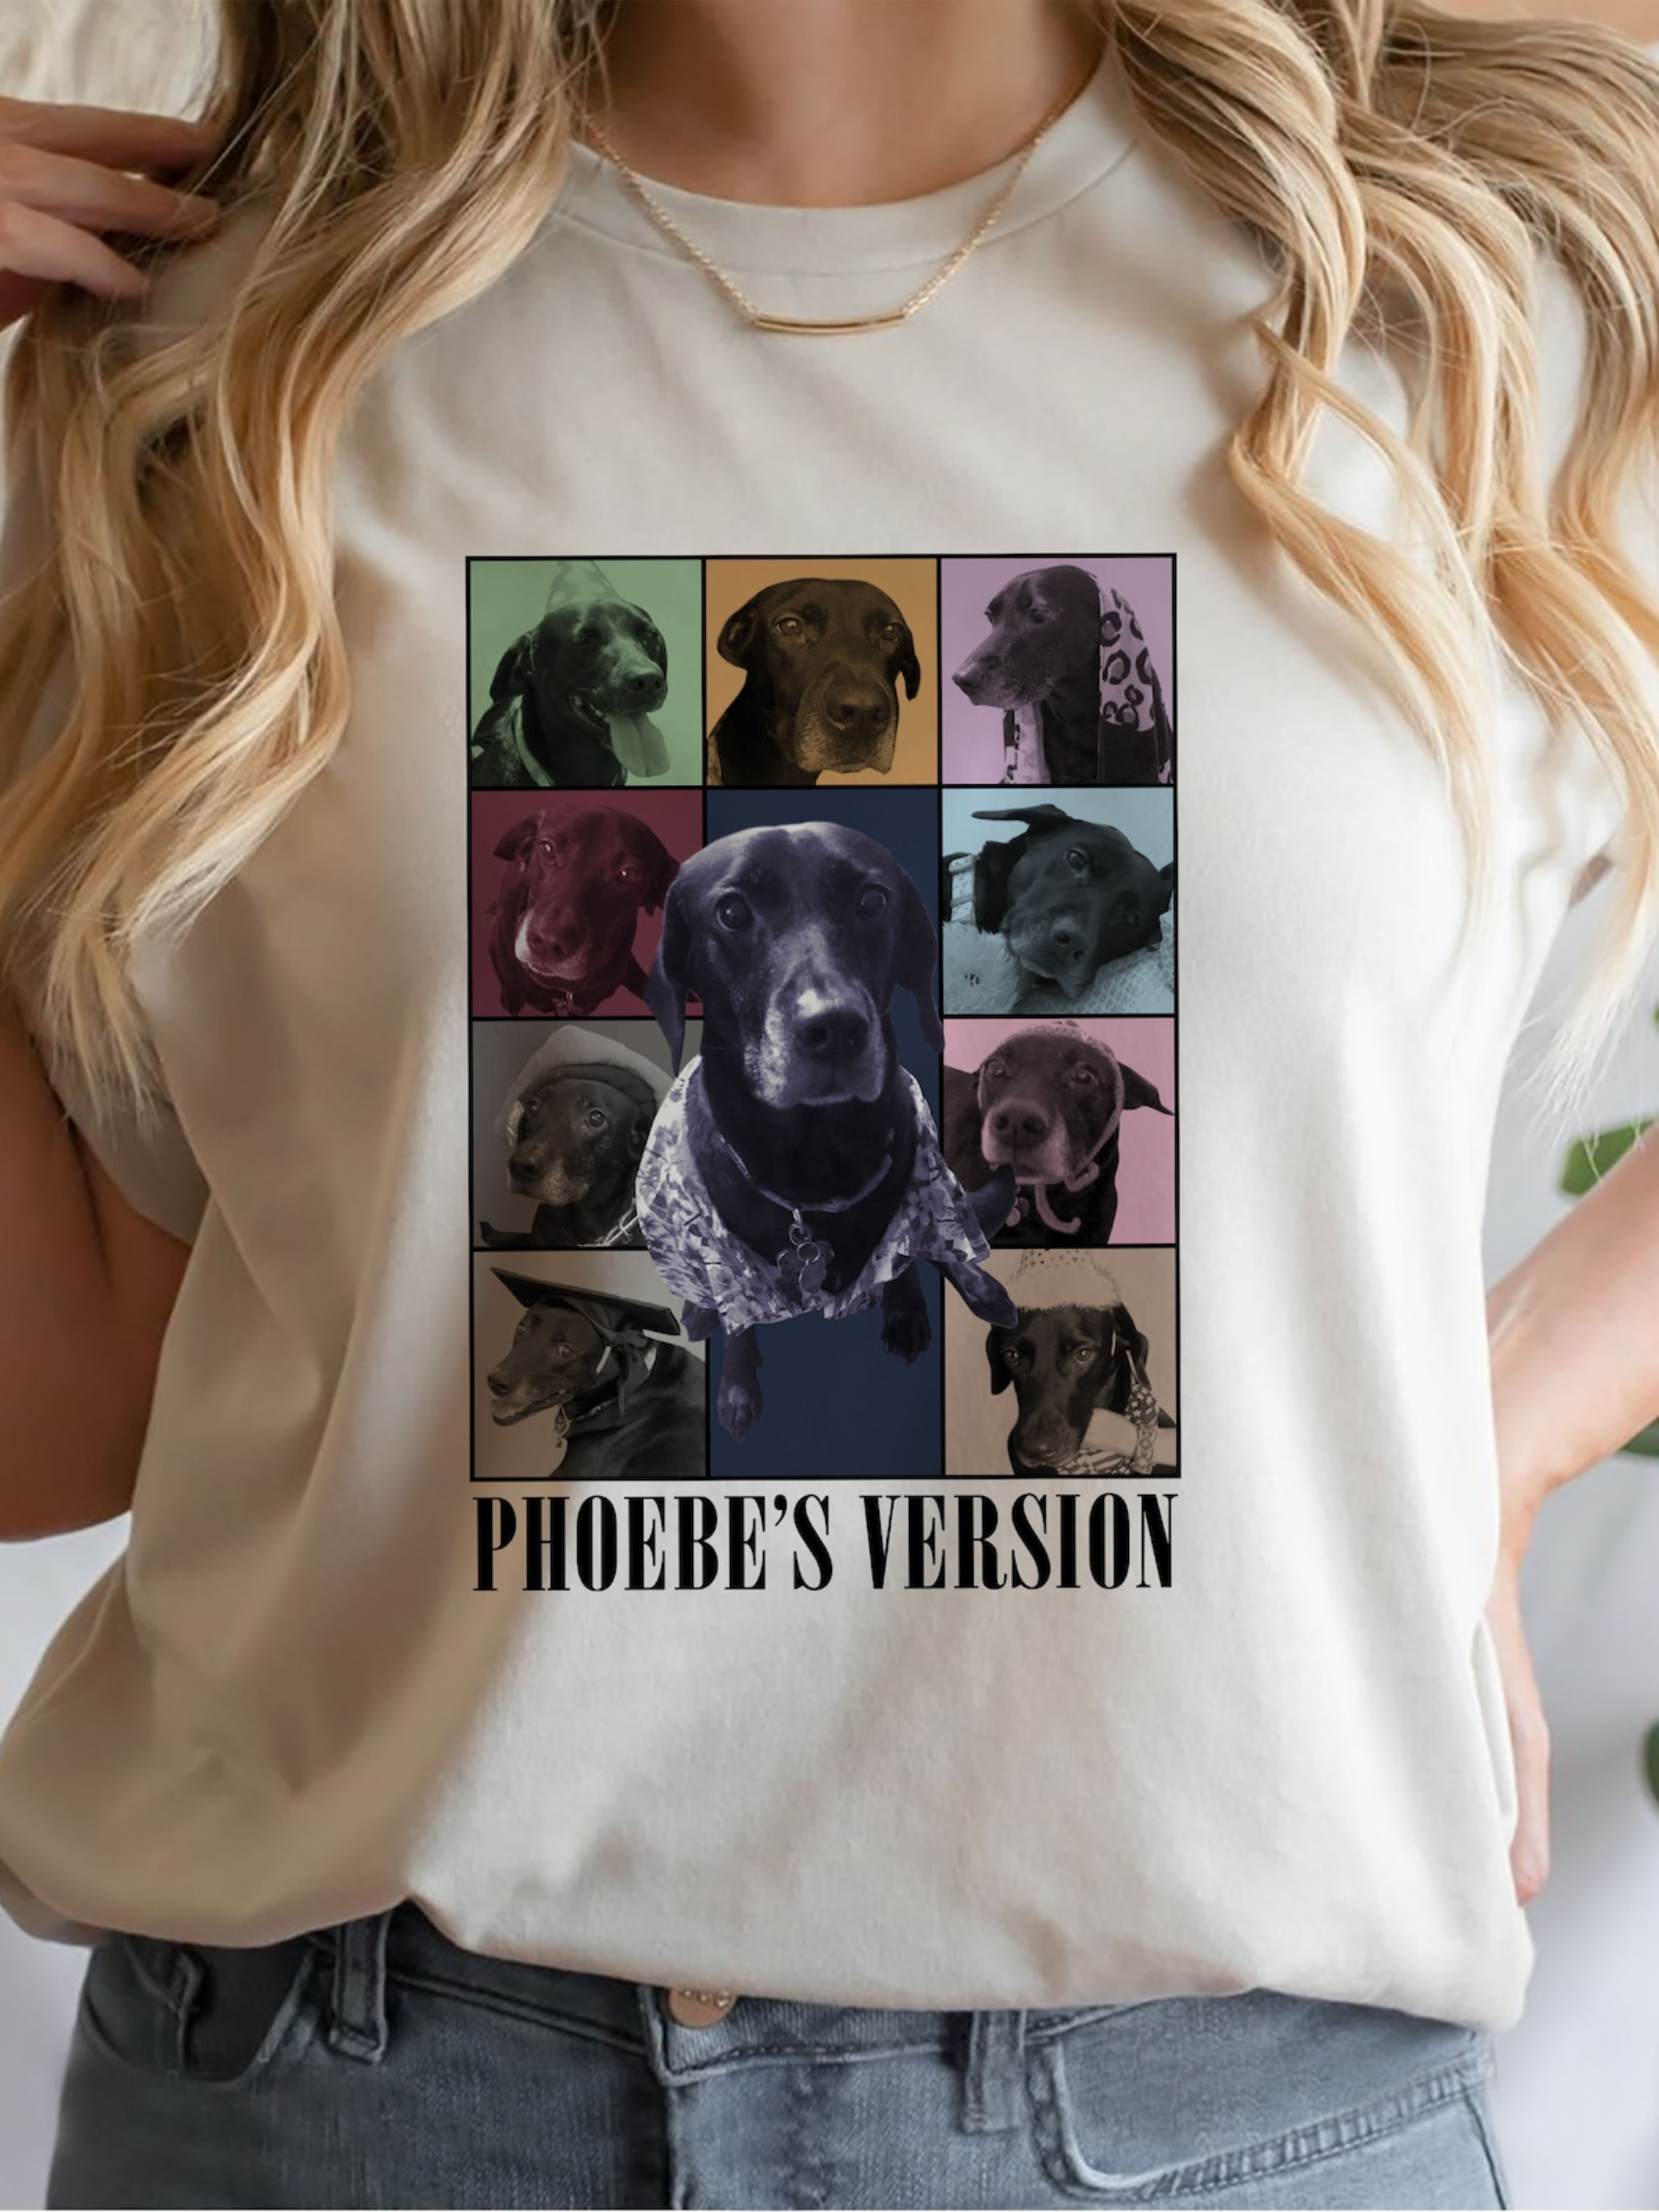 Since they can’t take their furry sibling to college with them, this thoughtful custom tee will keep them top of mind. Upload a few pics of your pet and it’ll be printed in a cute concert-style tee. $33, Etsy. <a href="https://www.etsy.com/listing/1661392169/custom-dogs-tour-shirt-personalized-dog?">Get it now!</a><p>Sign up for today’s biggest stories, from pop culture to politics.</p><a href="https://www.glamour.com/newsletter/news?sourceCode=msnsend">Sign Up</a>